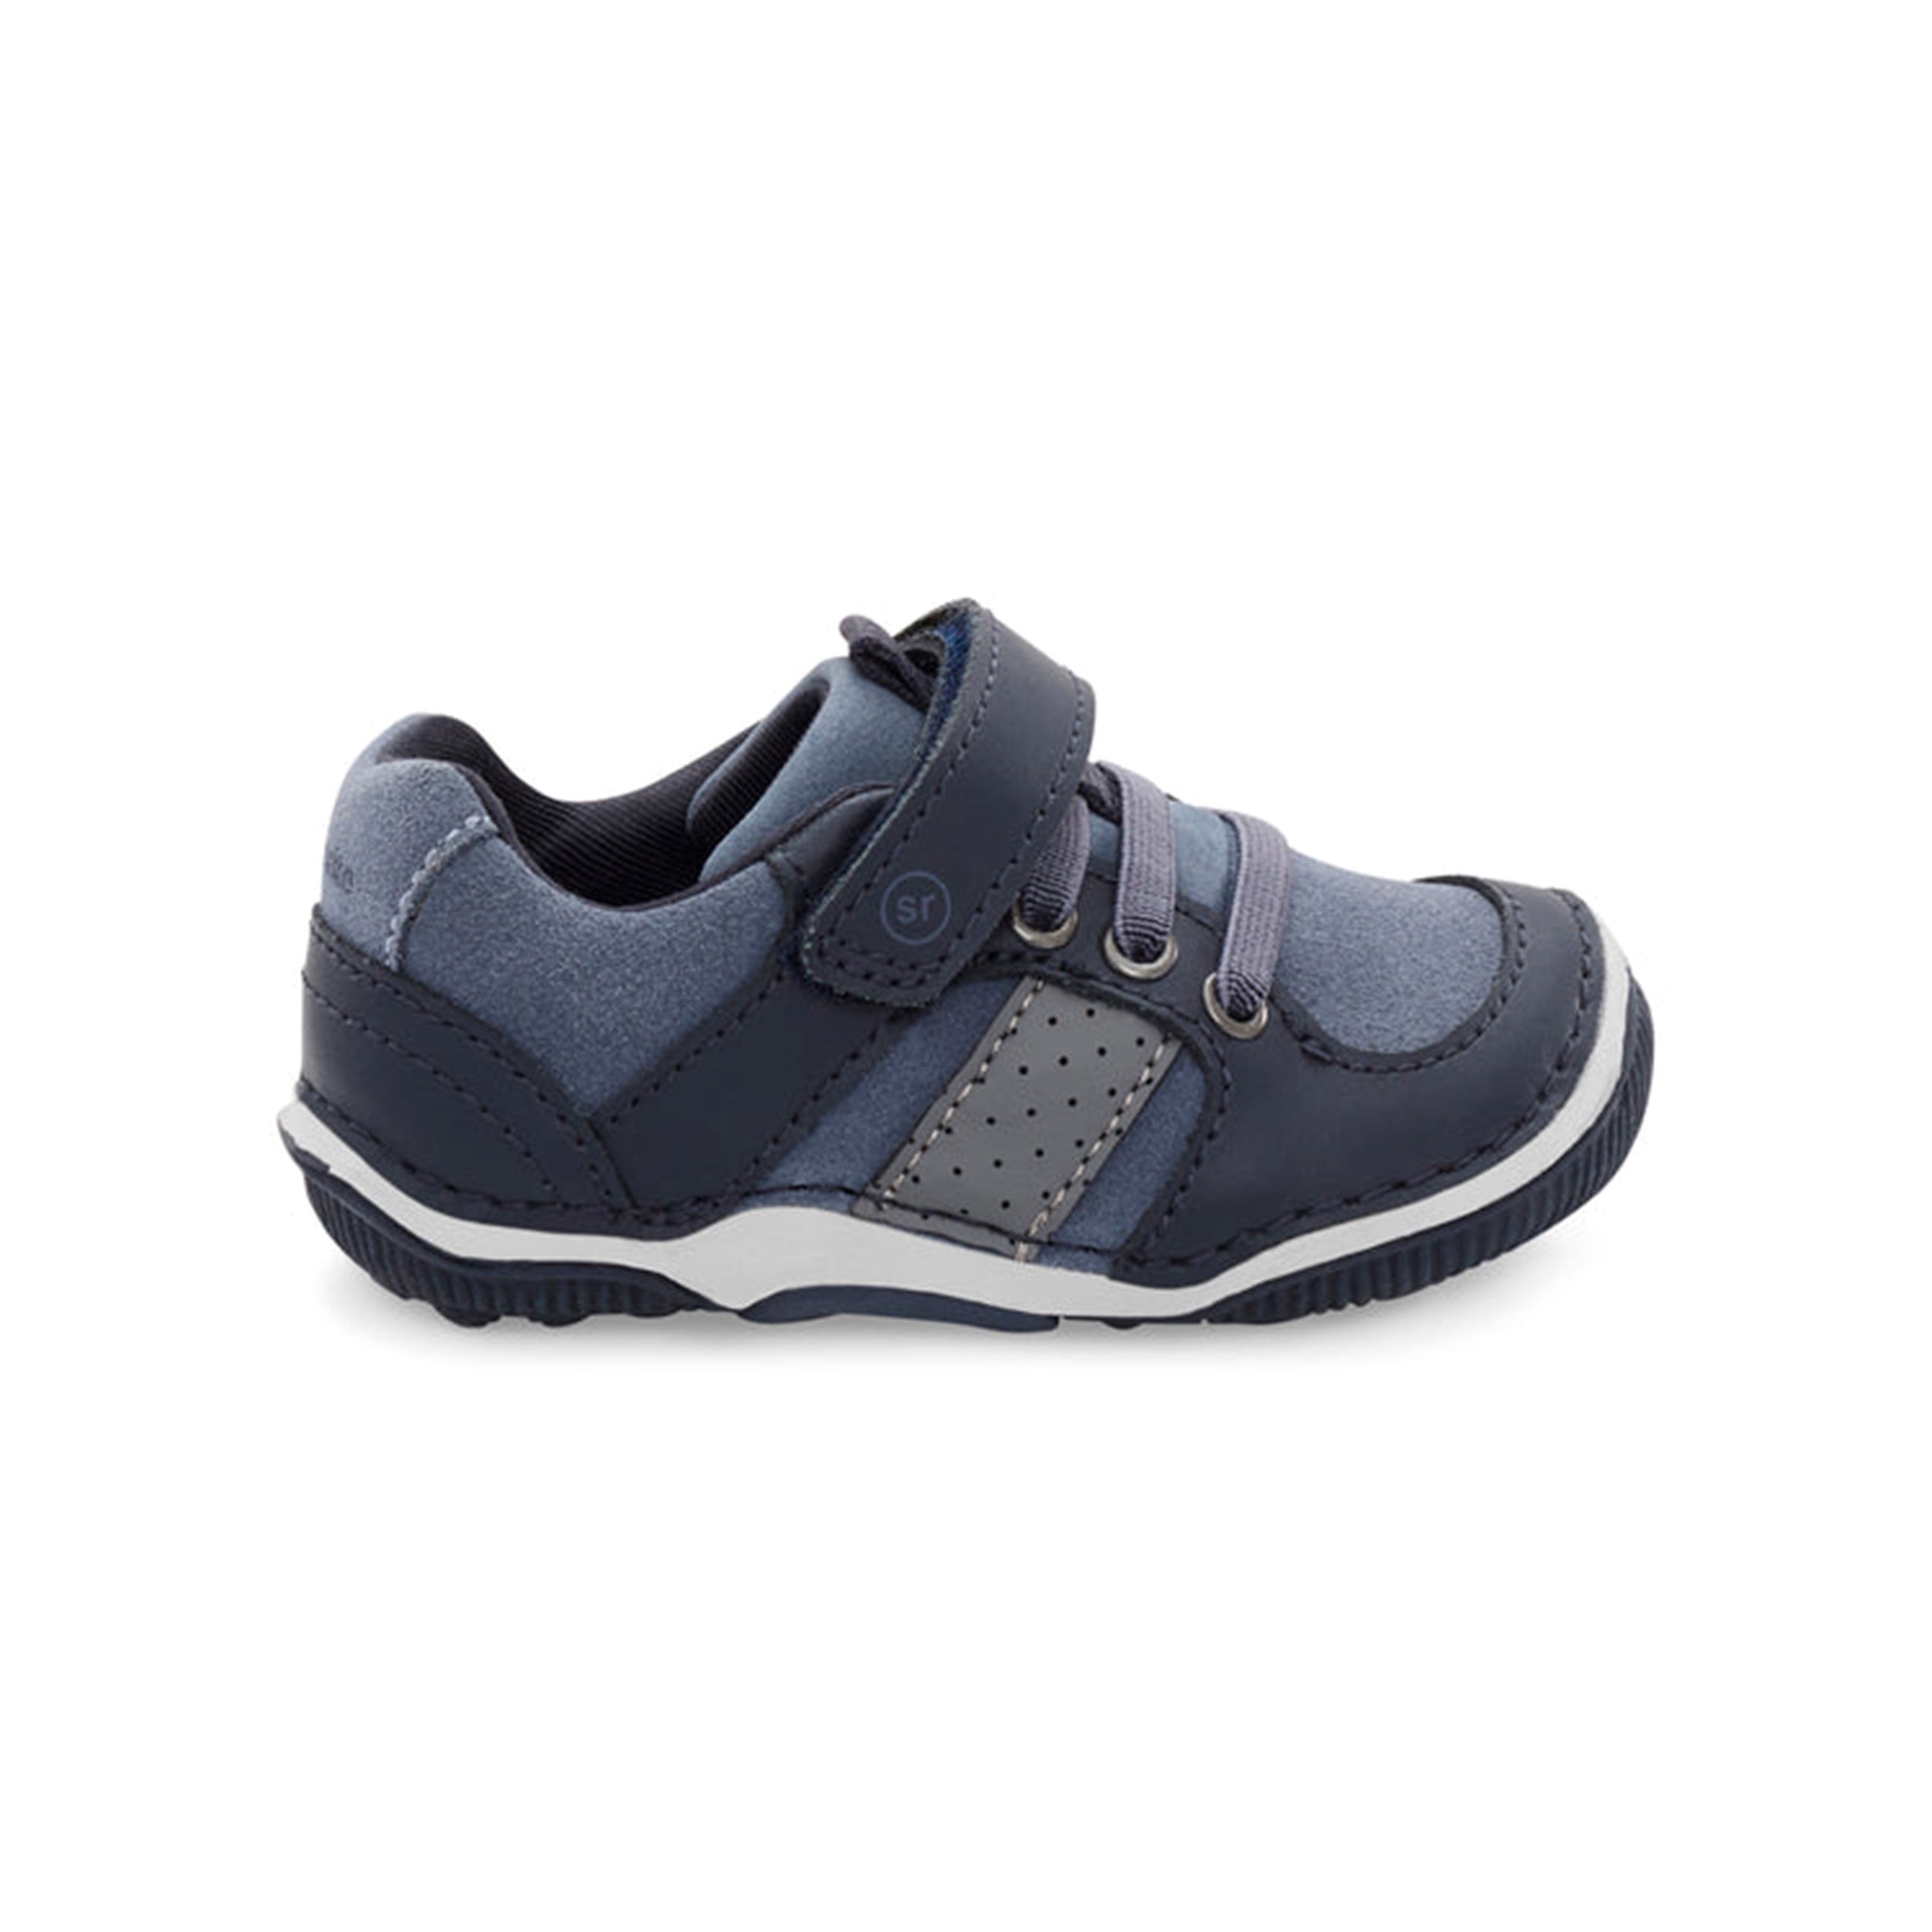 SRTech Wes Kid's Leather Sneaker - Navy